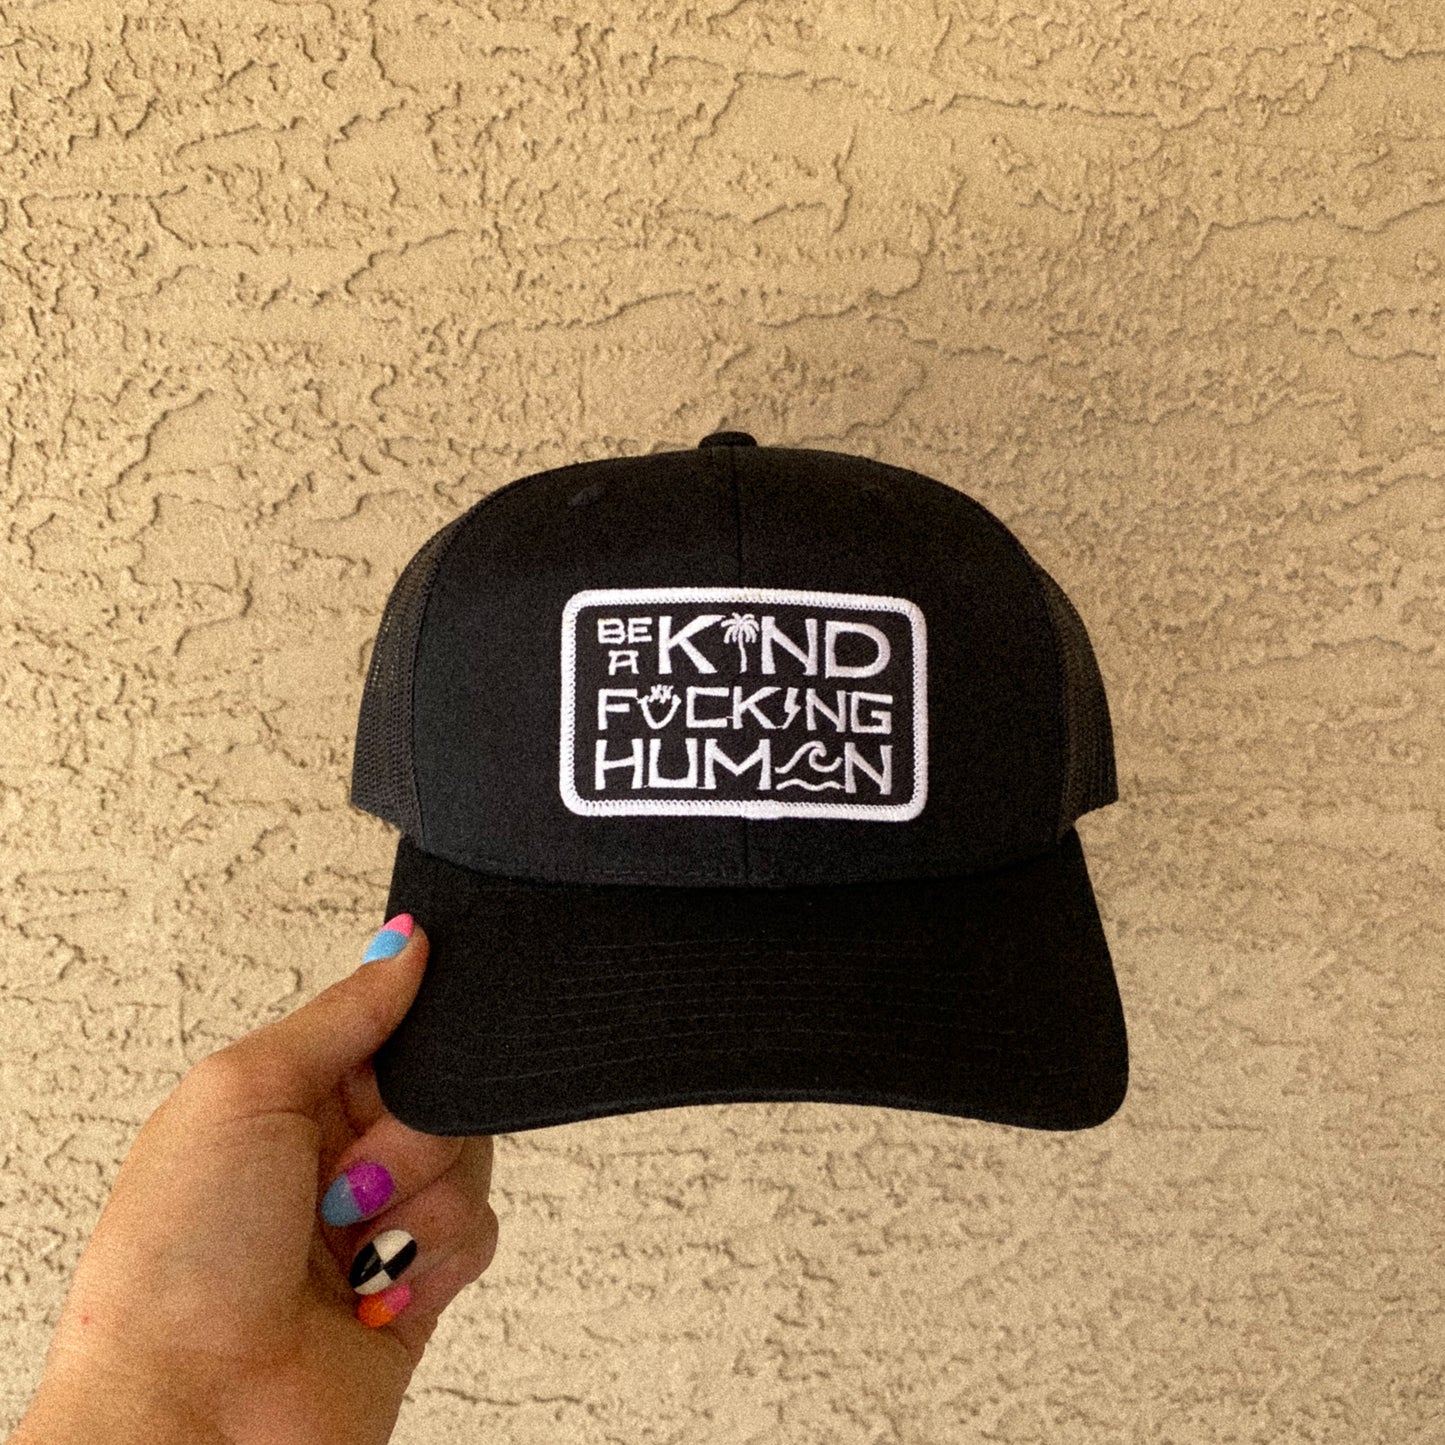 MEN'S BE A KIND HUMAN HAT - BLACK PATCH, CURVED